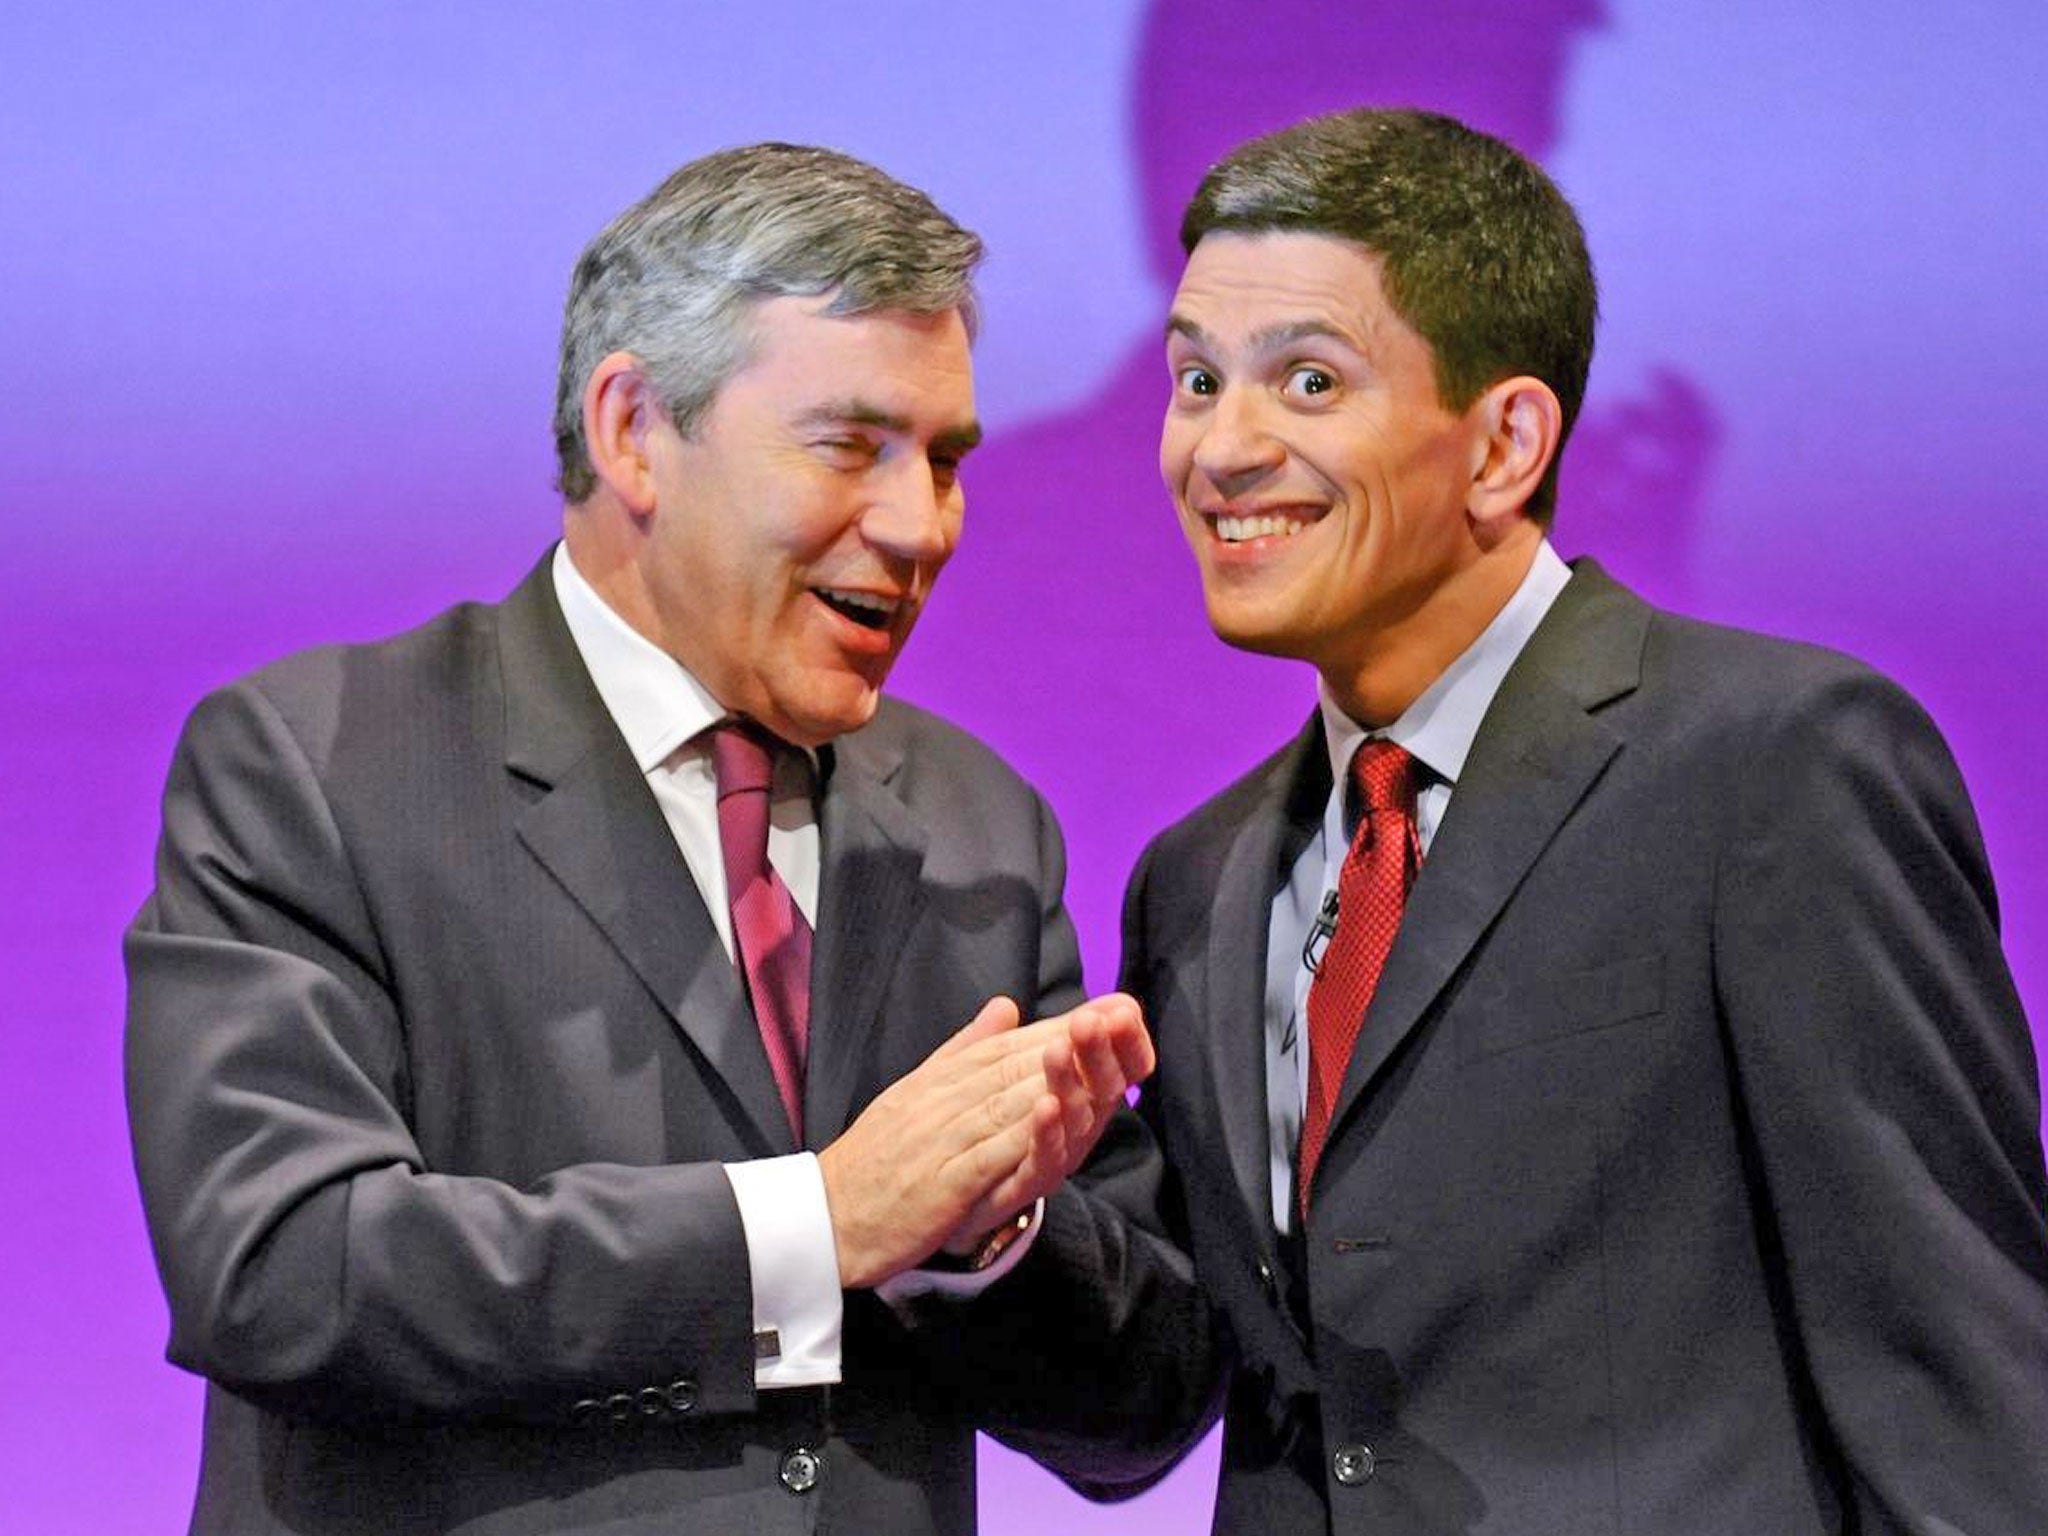 Former Prime Minister Gordon Brown with former Foreign Secretary David Miliband at the Labour Party conference